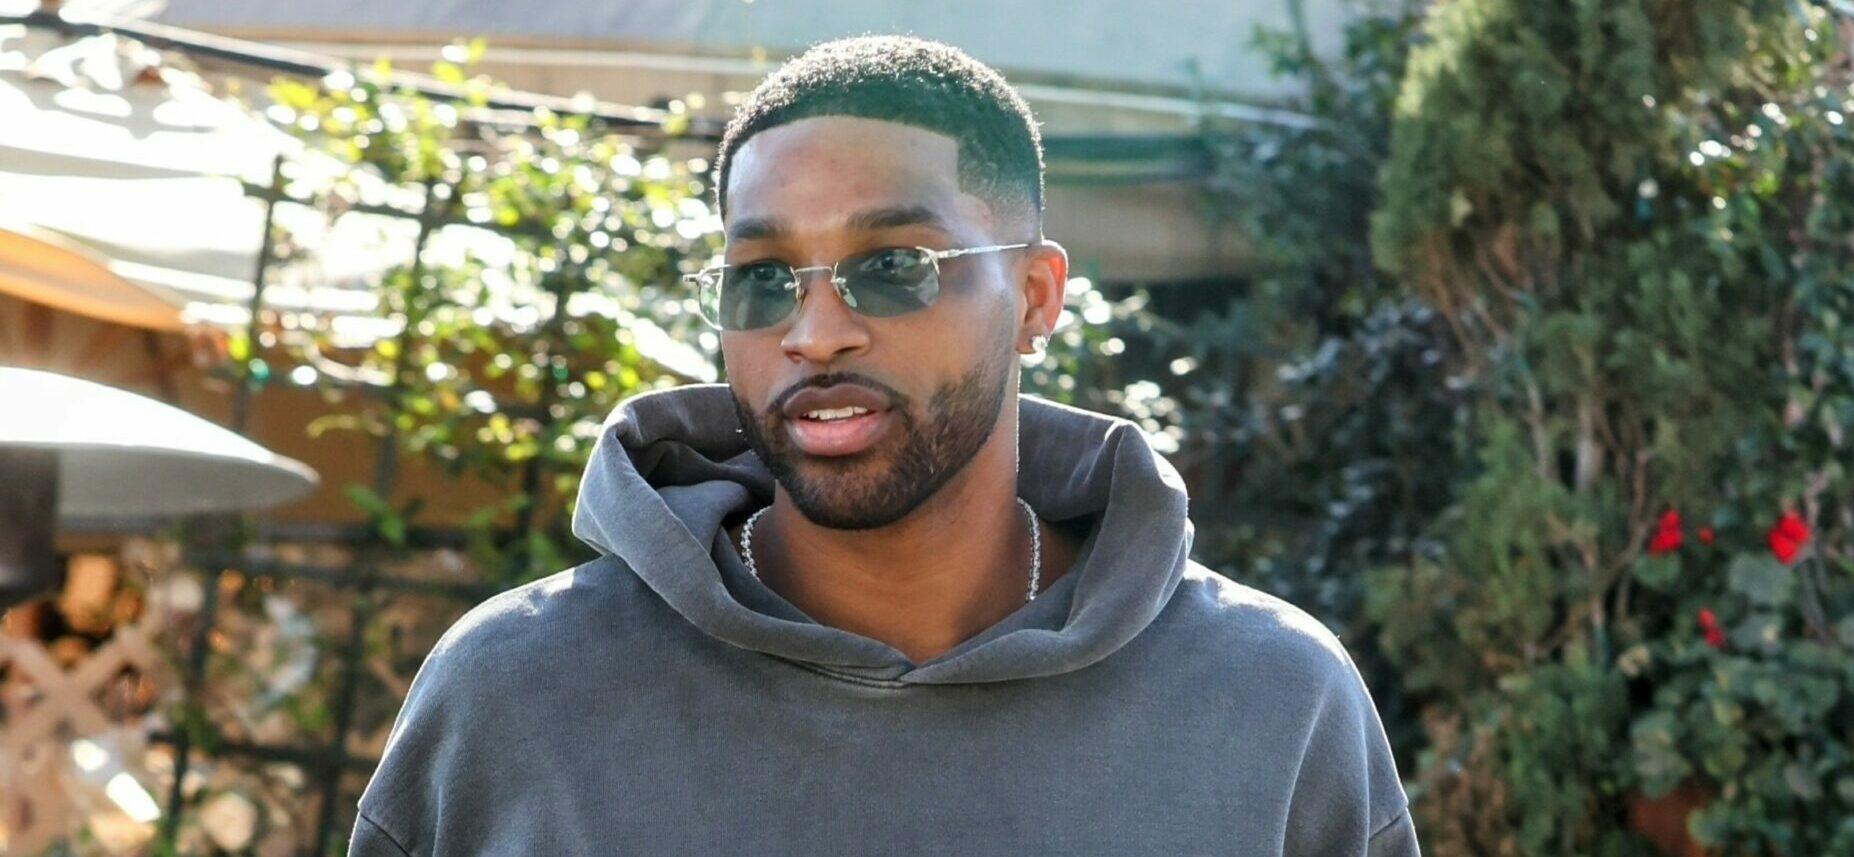 Tristan Thompson Wants The World To Know He Can Be A Better Man For Khloe Kardashian, Says Source